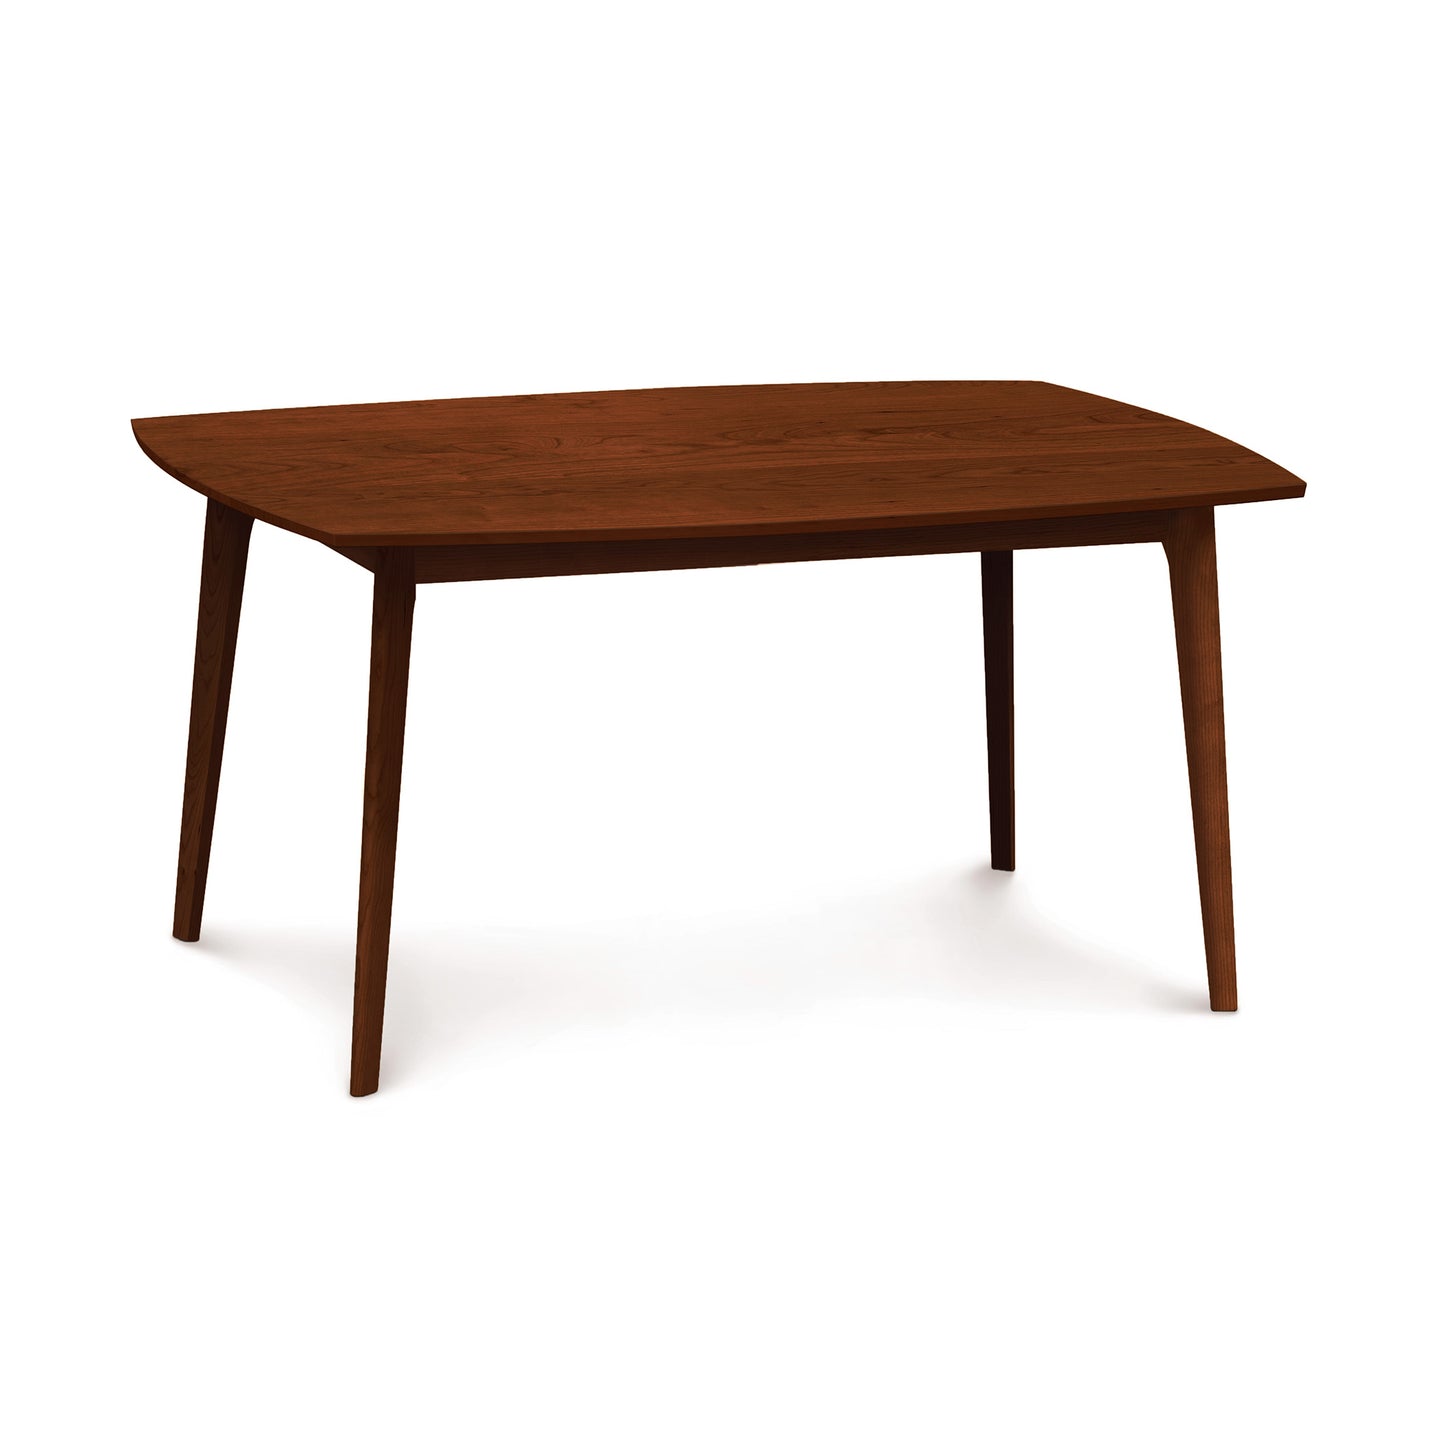 A Copeland Furniture Catalina Solid-Top Table, sustainably-sourced hardwood dining table with four legs and a rectangular top with rounded corners, isolated on a white background.